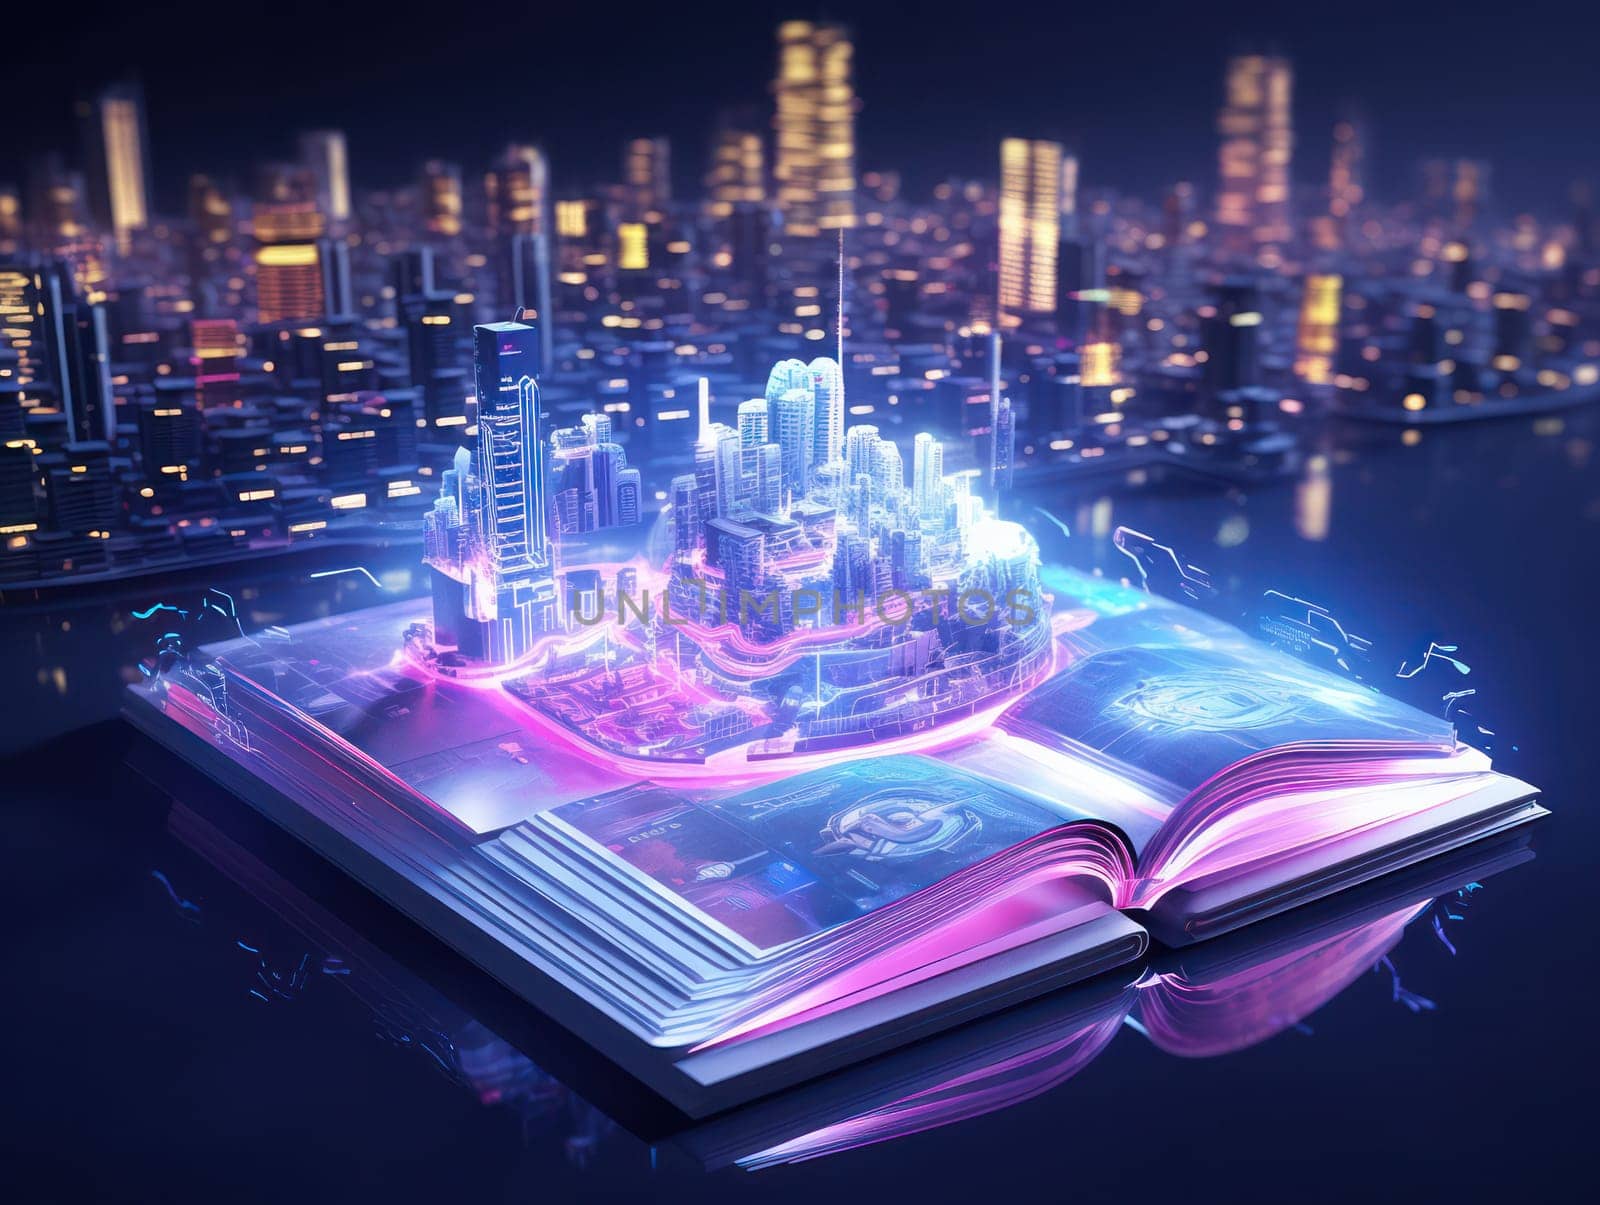 Connected City: A Futuristic Network of Smart Skyscrapers Illuminated with Neon Lights in the Vibrant Cityscape by Vichizh